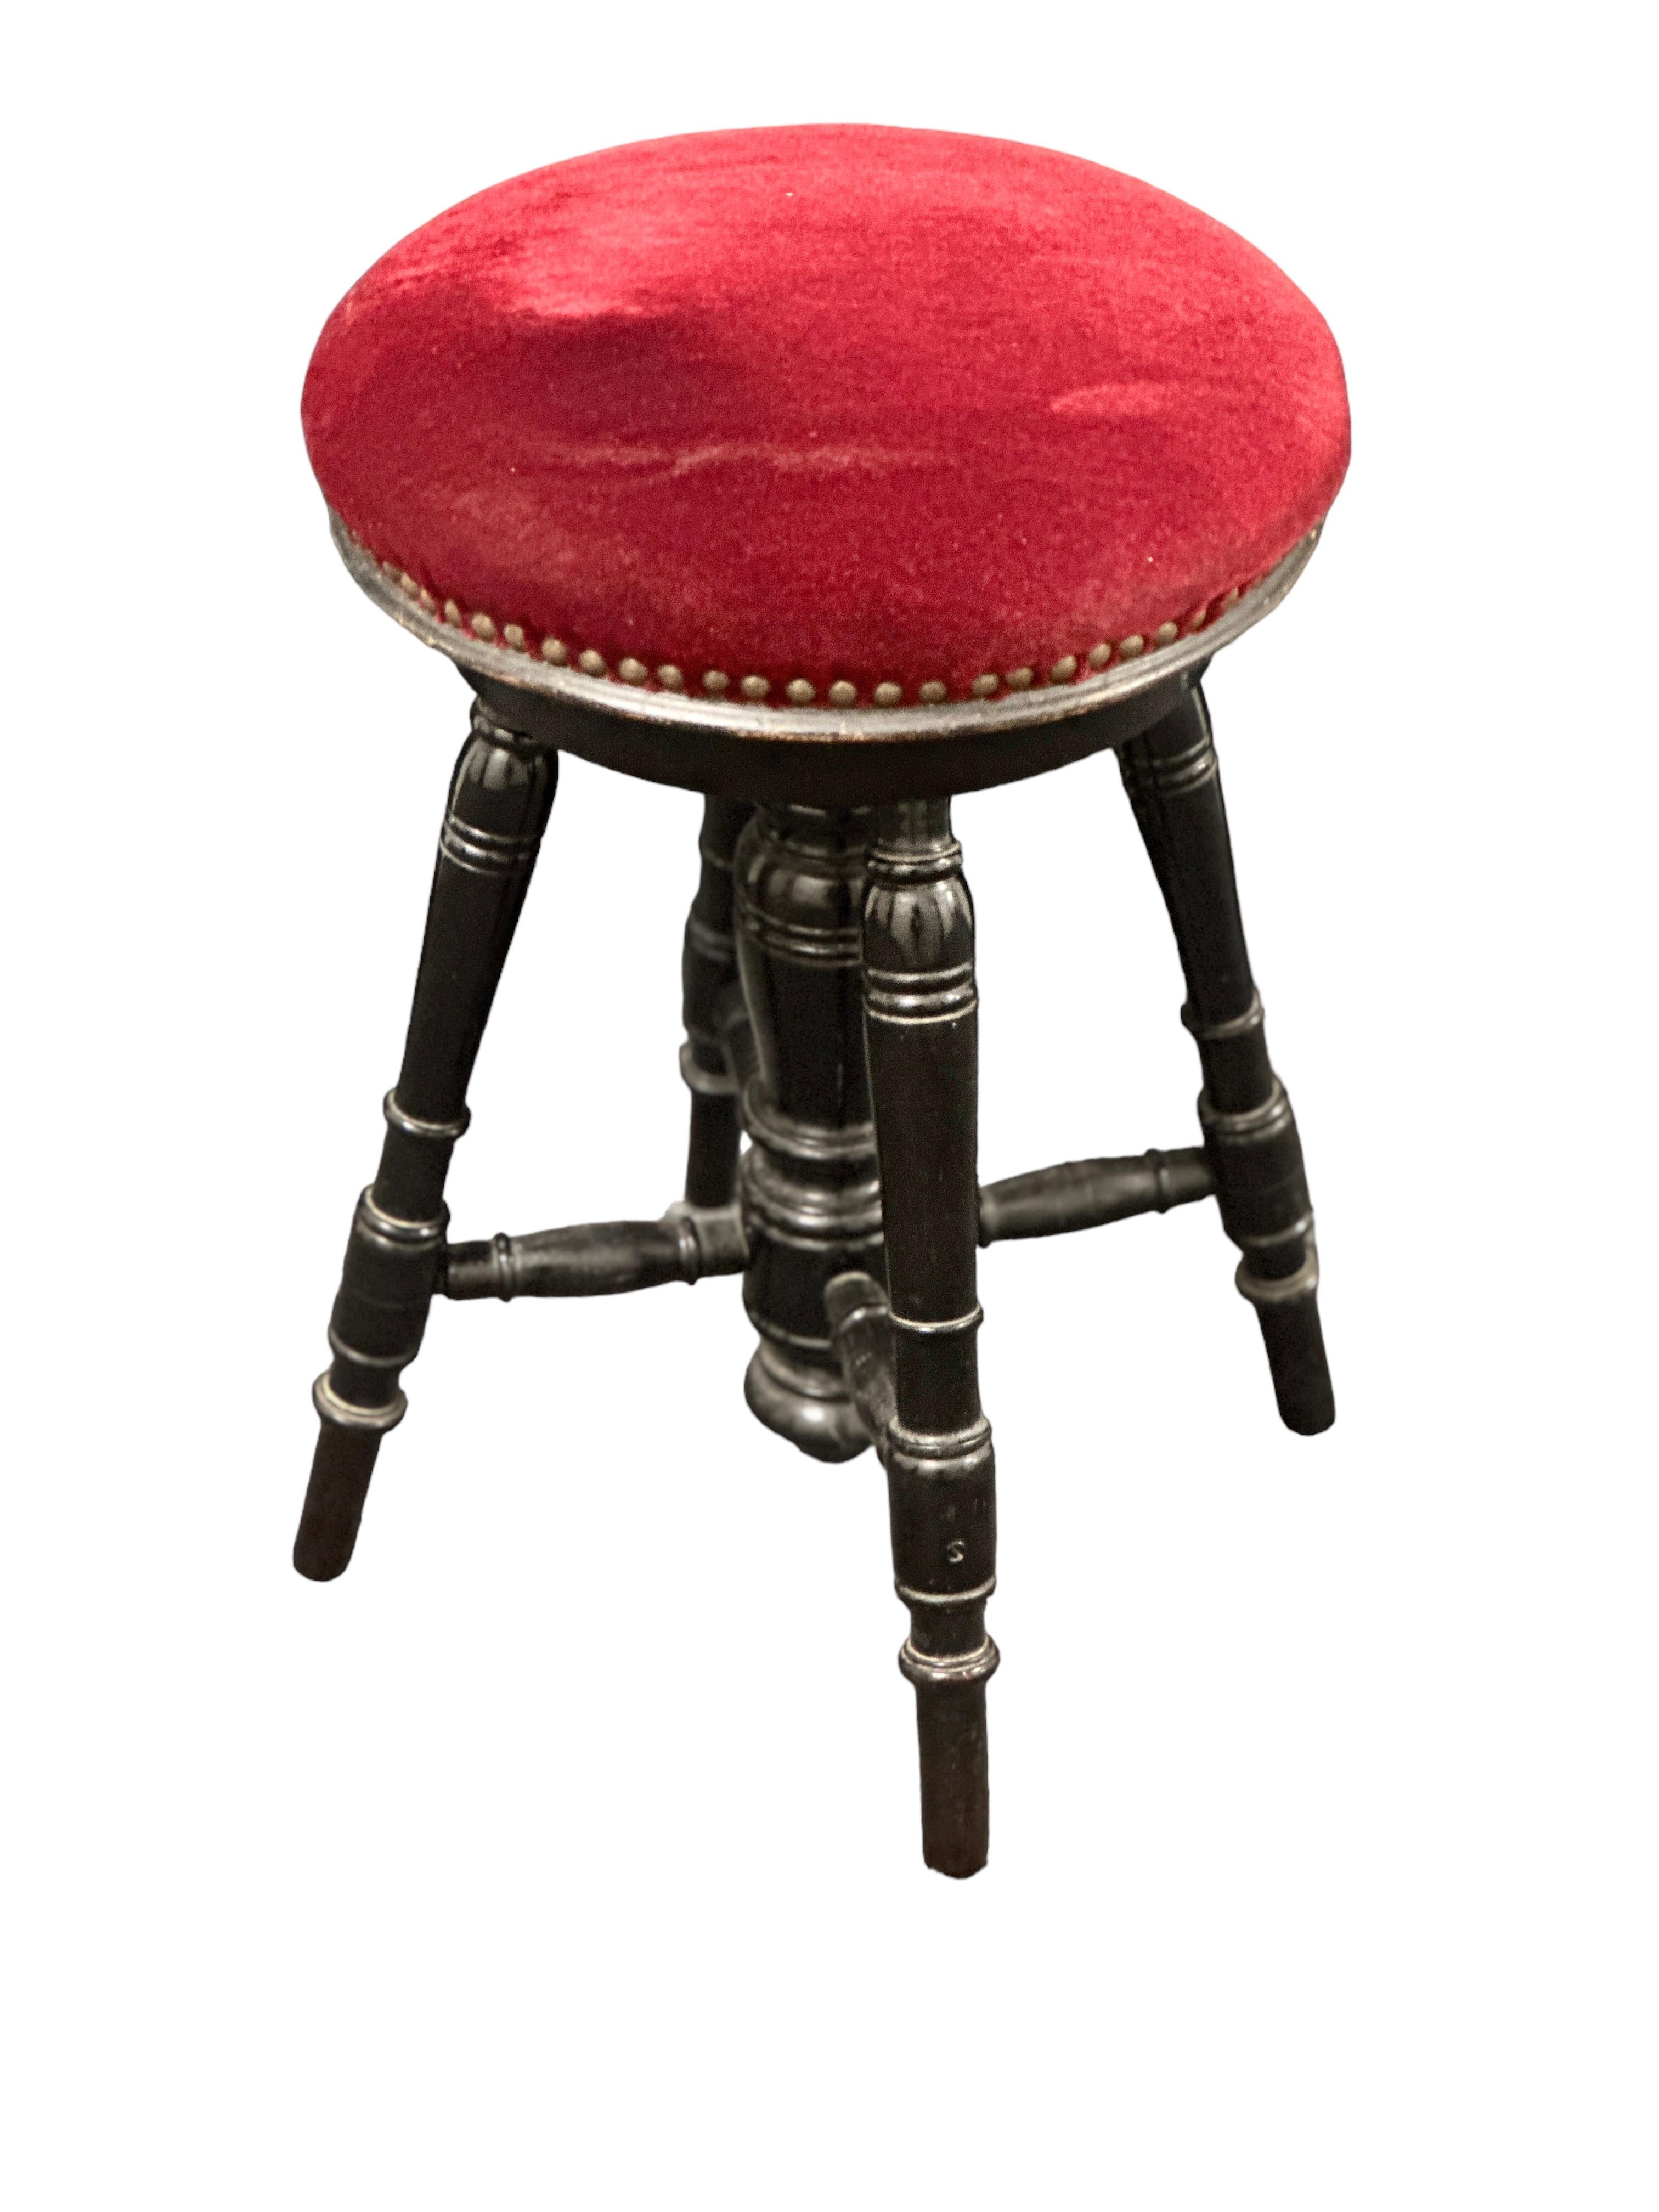 Early 20th Century Swivel Piano Stool with Red Velvet Seat, Belgium For Sale 2